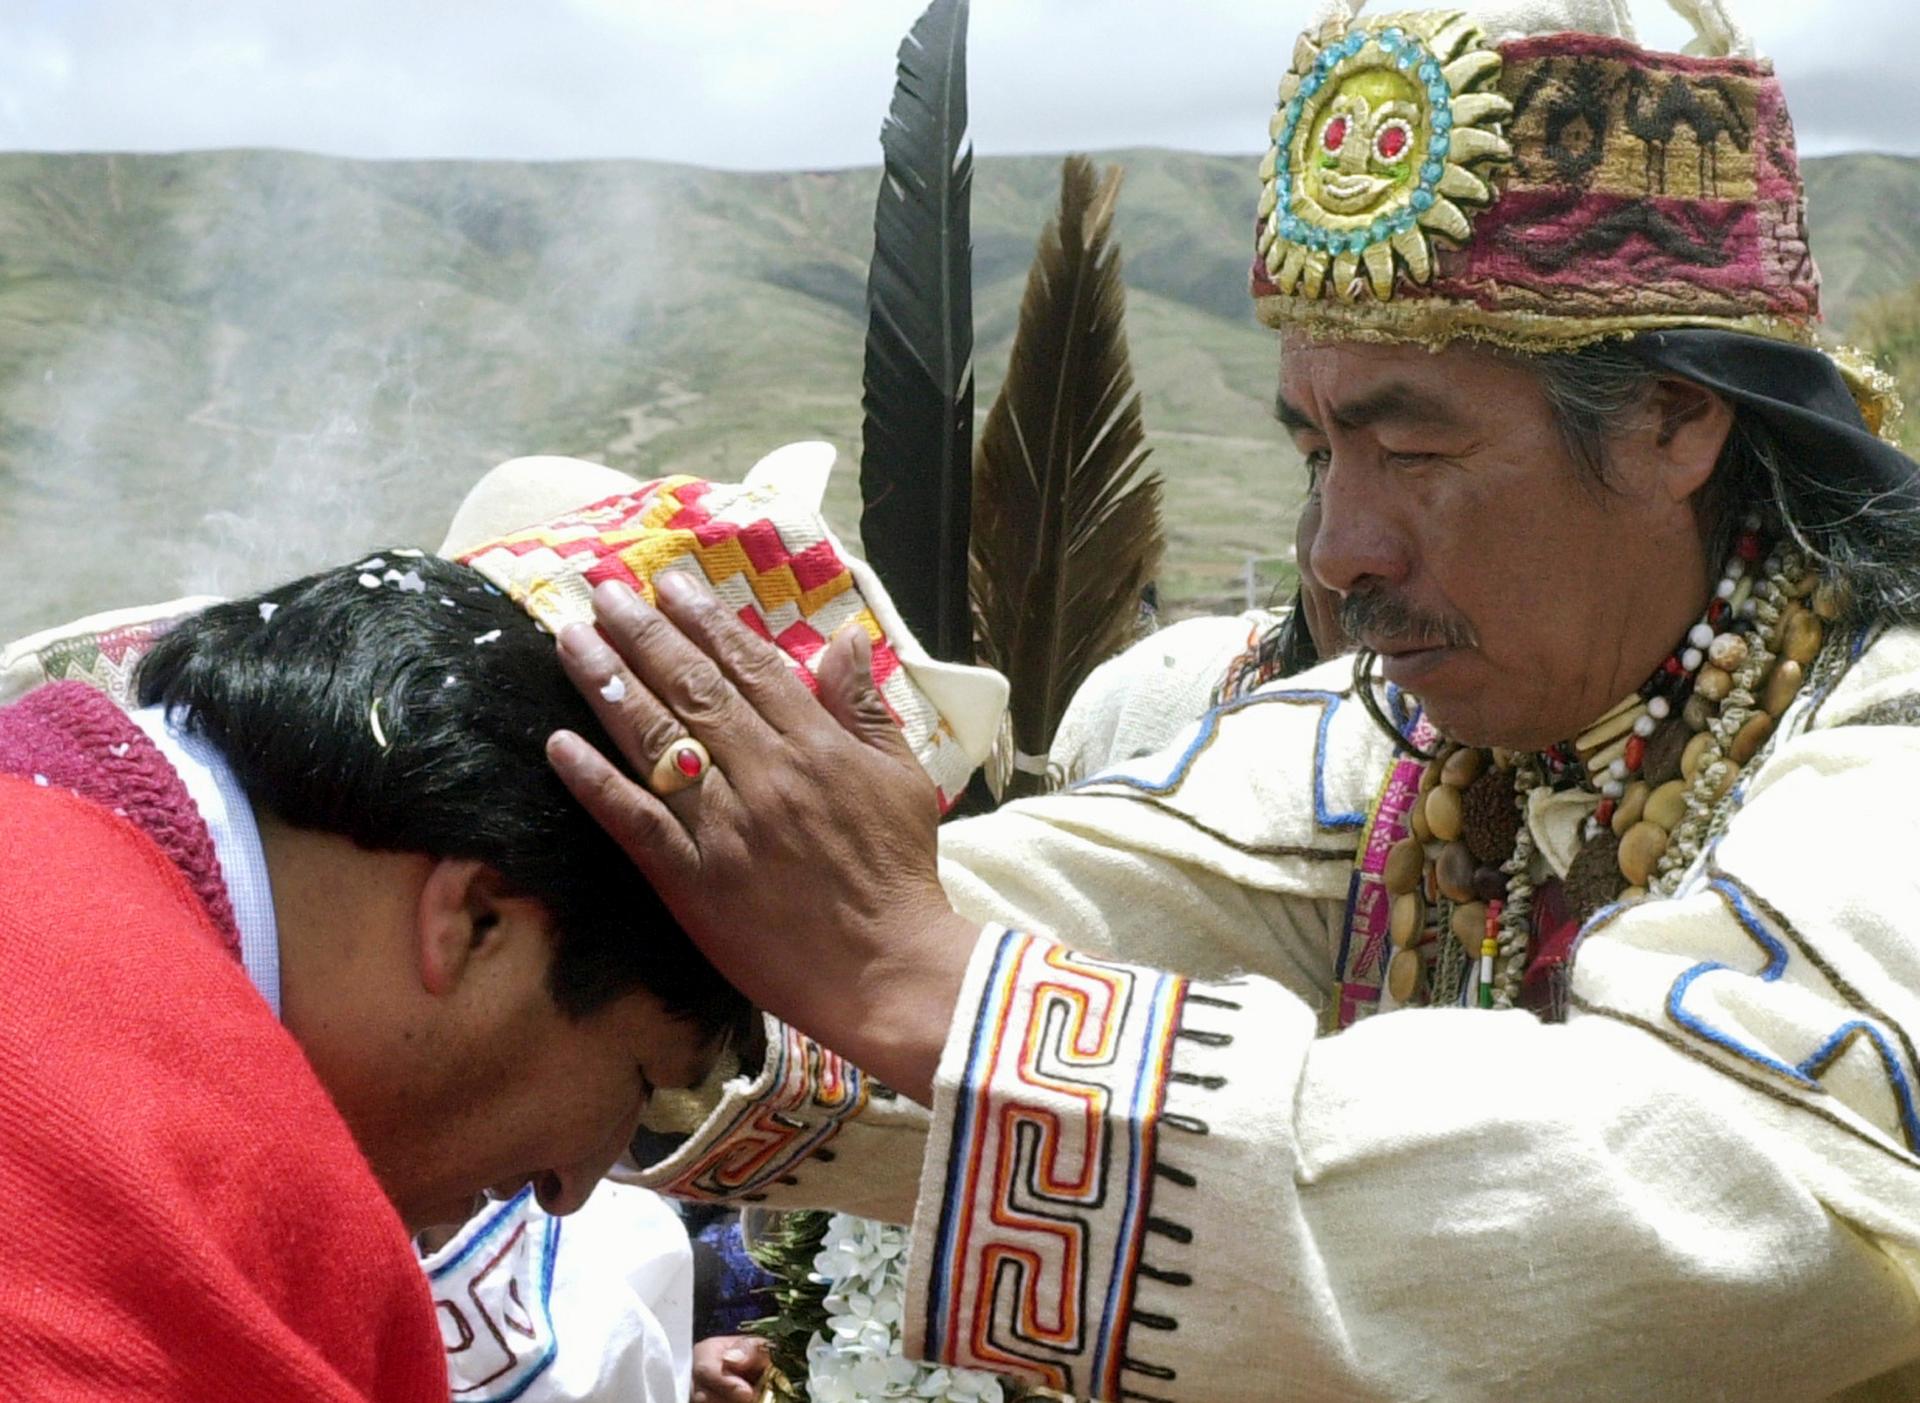 Bolivian President Evo Morales (L) is blessed by Aymara priest Valentin Mejillones during a ceremony at Tiawanaku, a pre-Columbian archaeological site about 40 miles west of La Paz, in 2006. The Aymara people, of which Morales is a member, are the descend